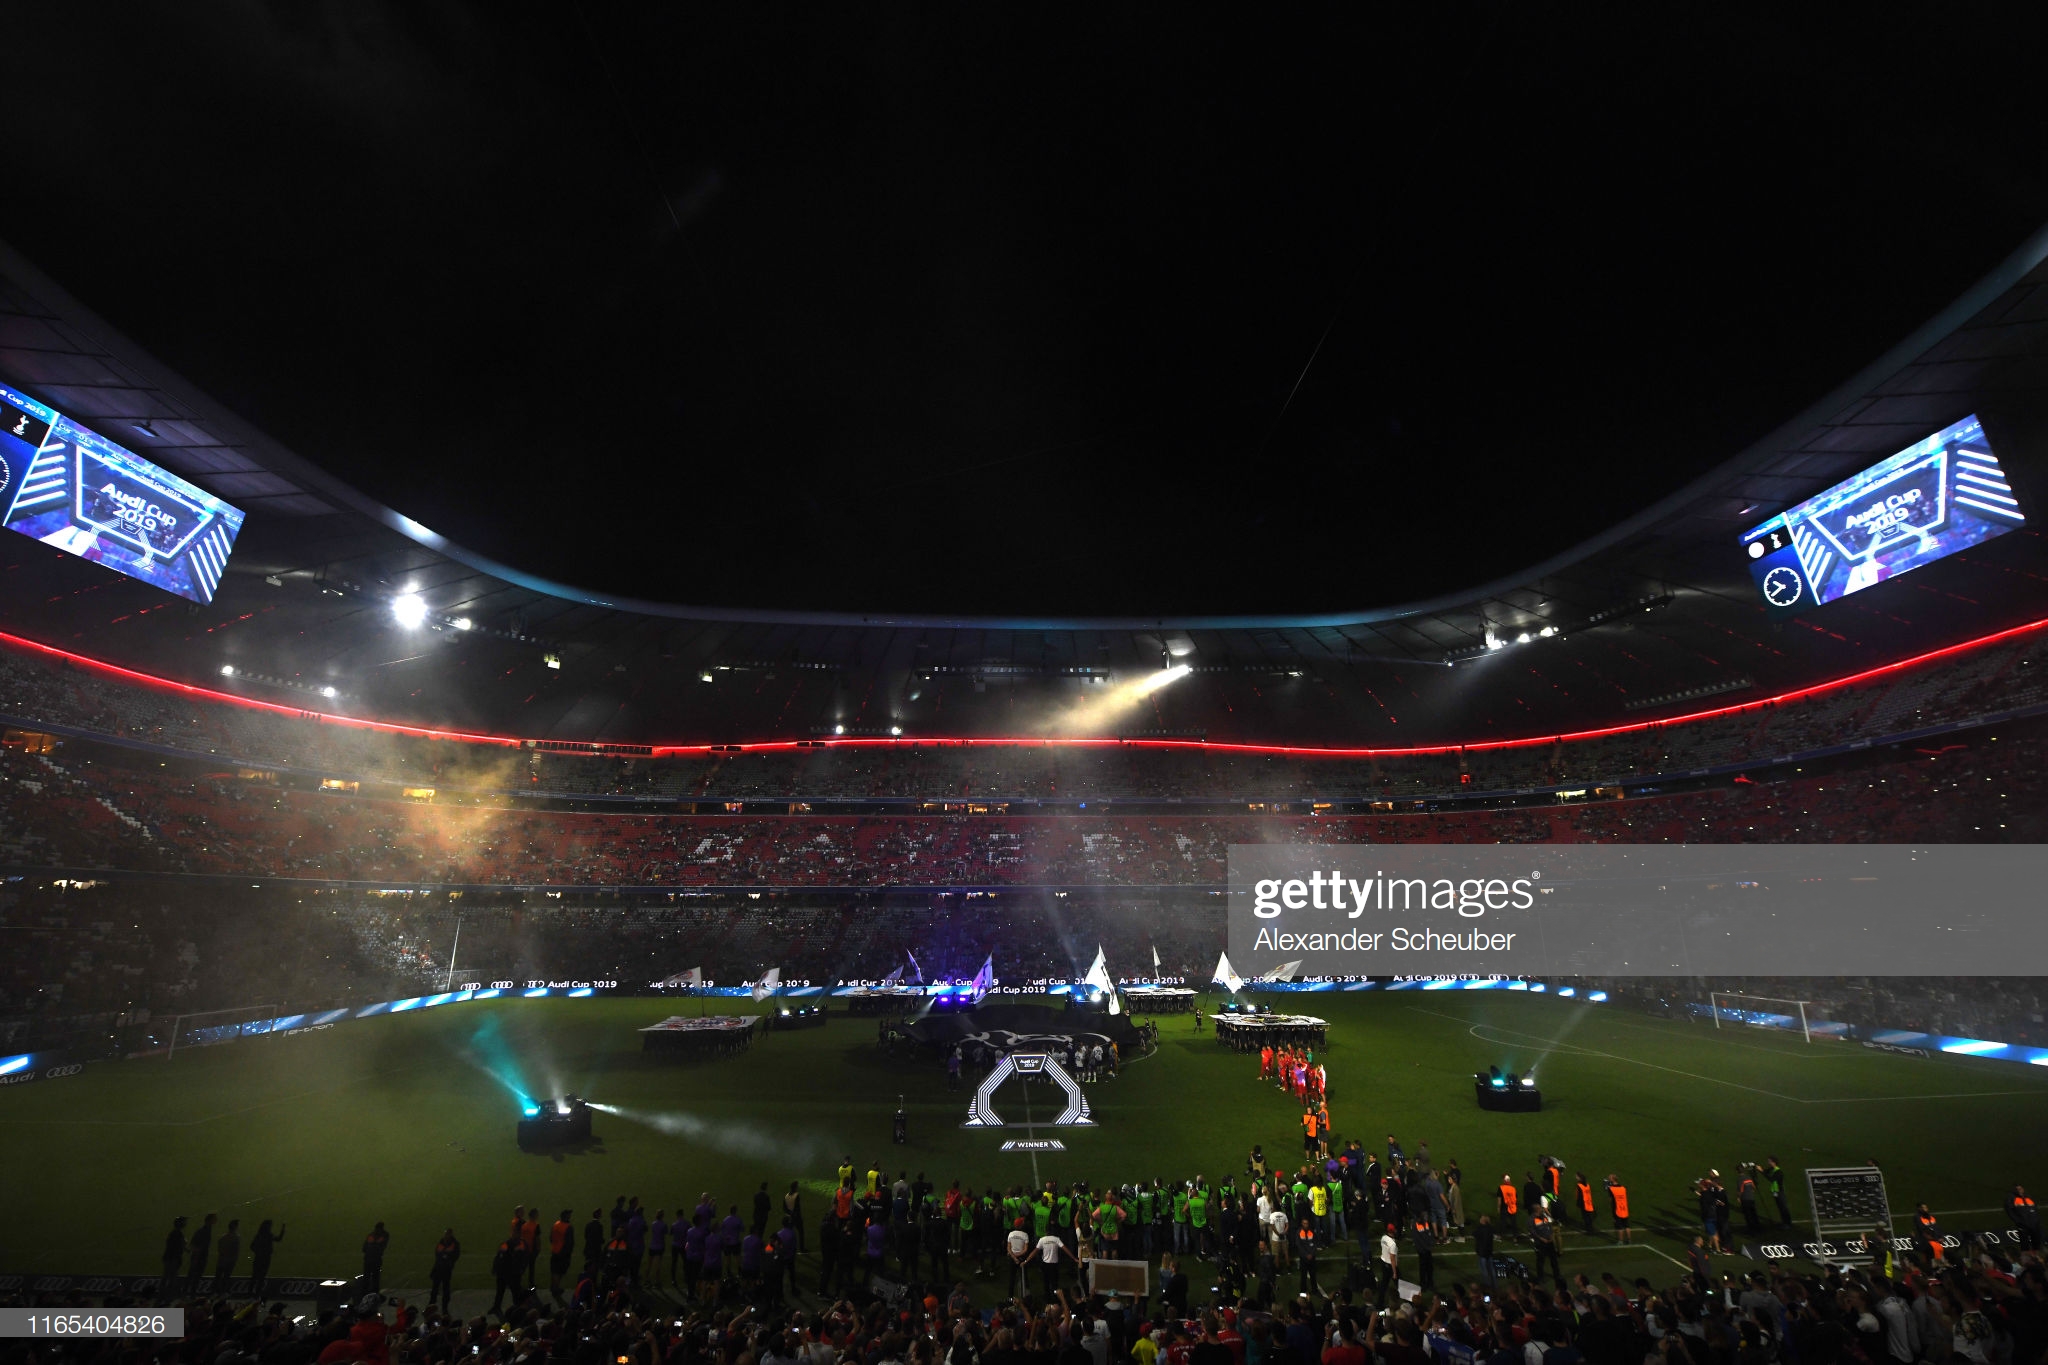 gettyimages-1165404826-2048x2048.jpg